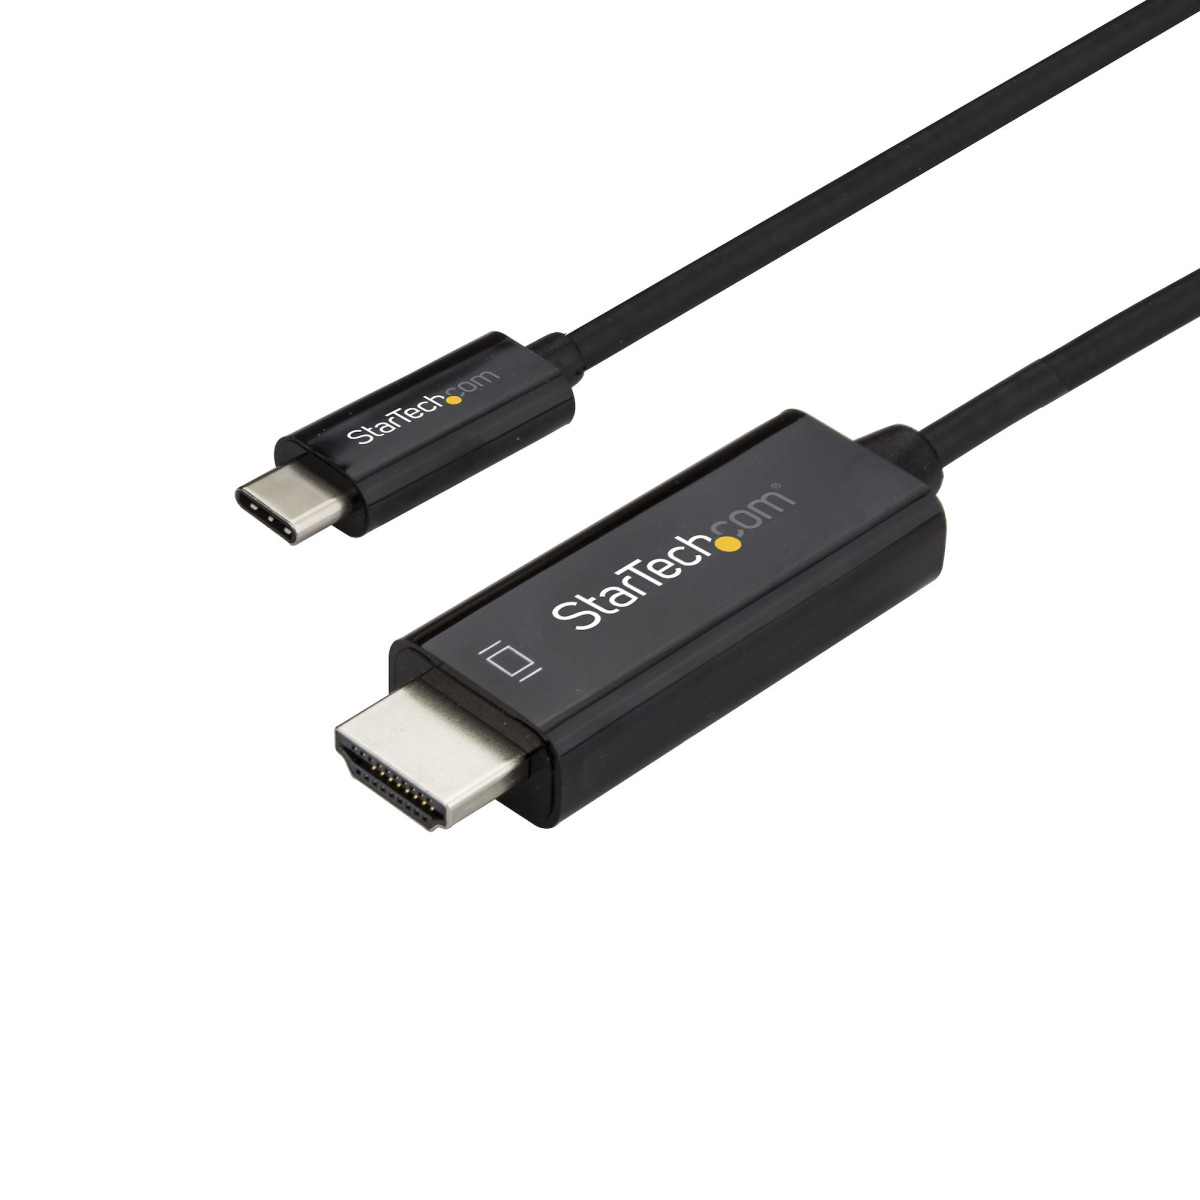 Cable USB C to HDMI 1m 4K60Hz - Black